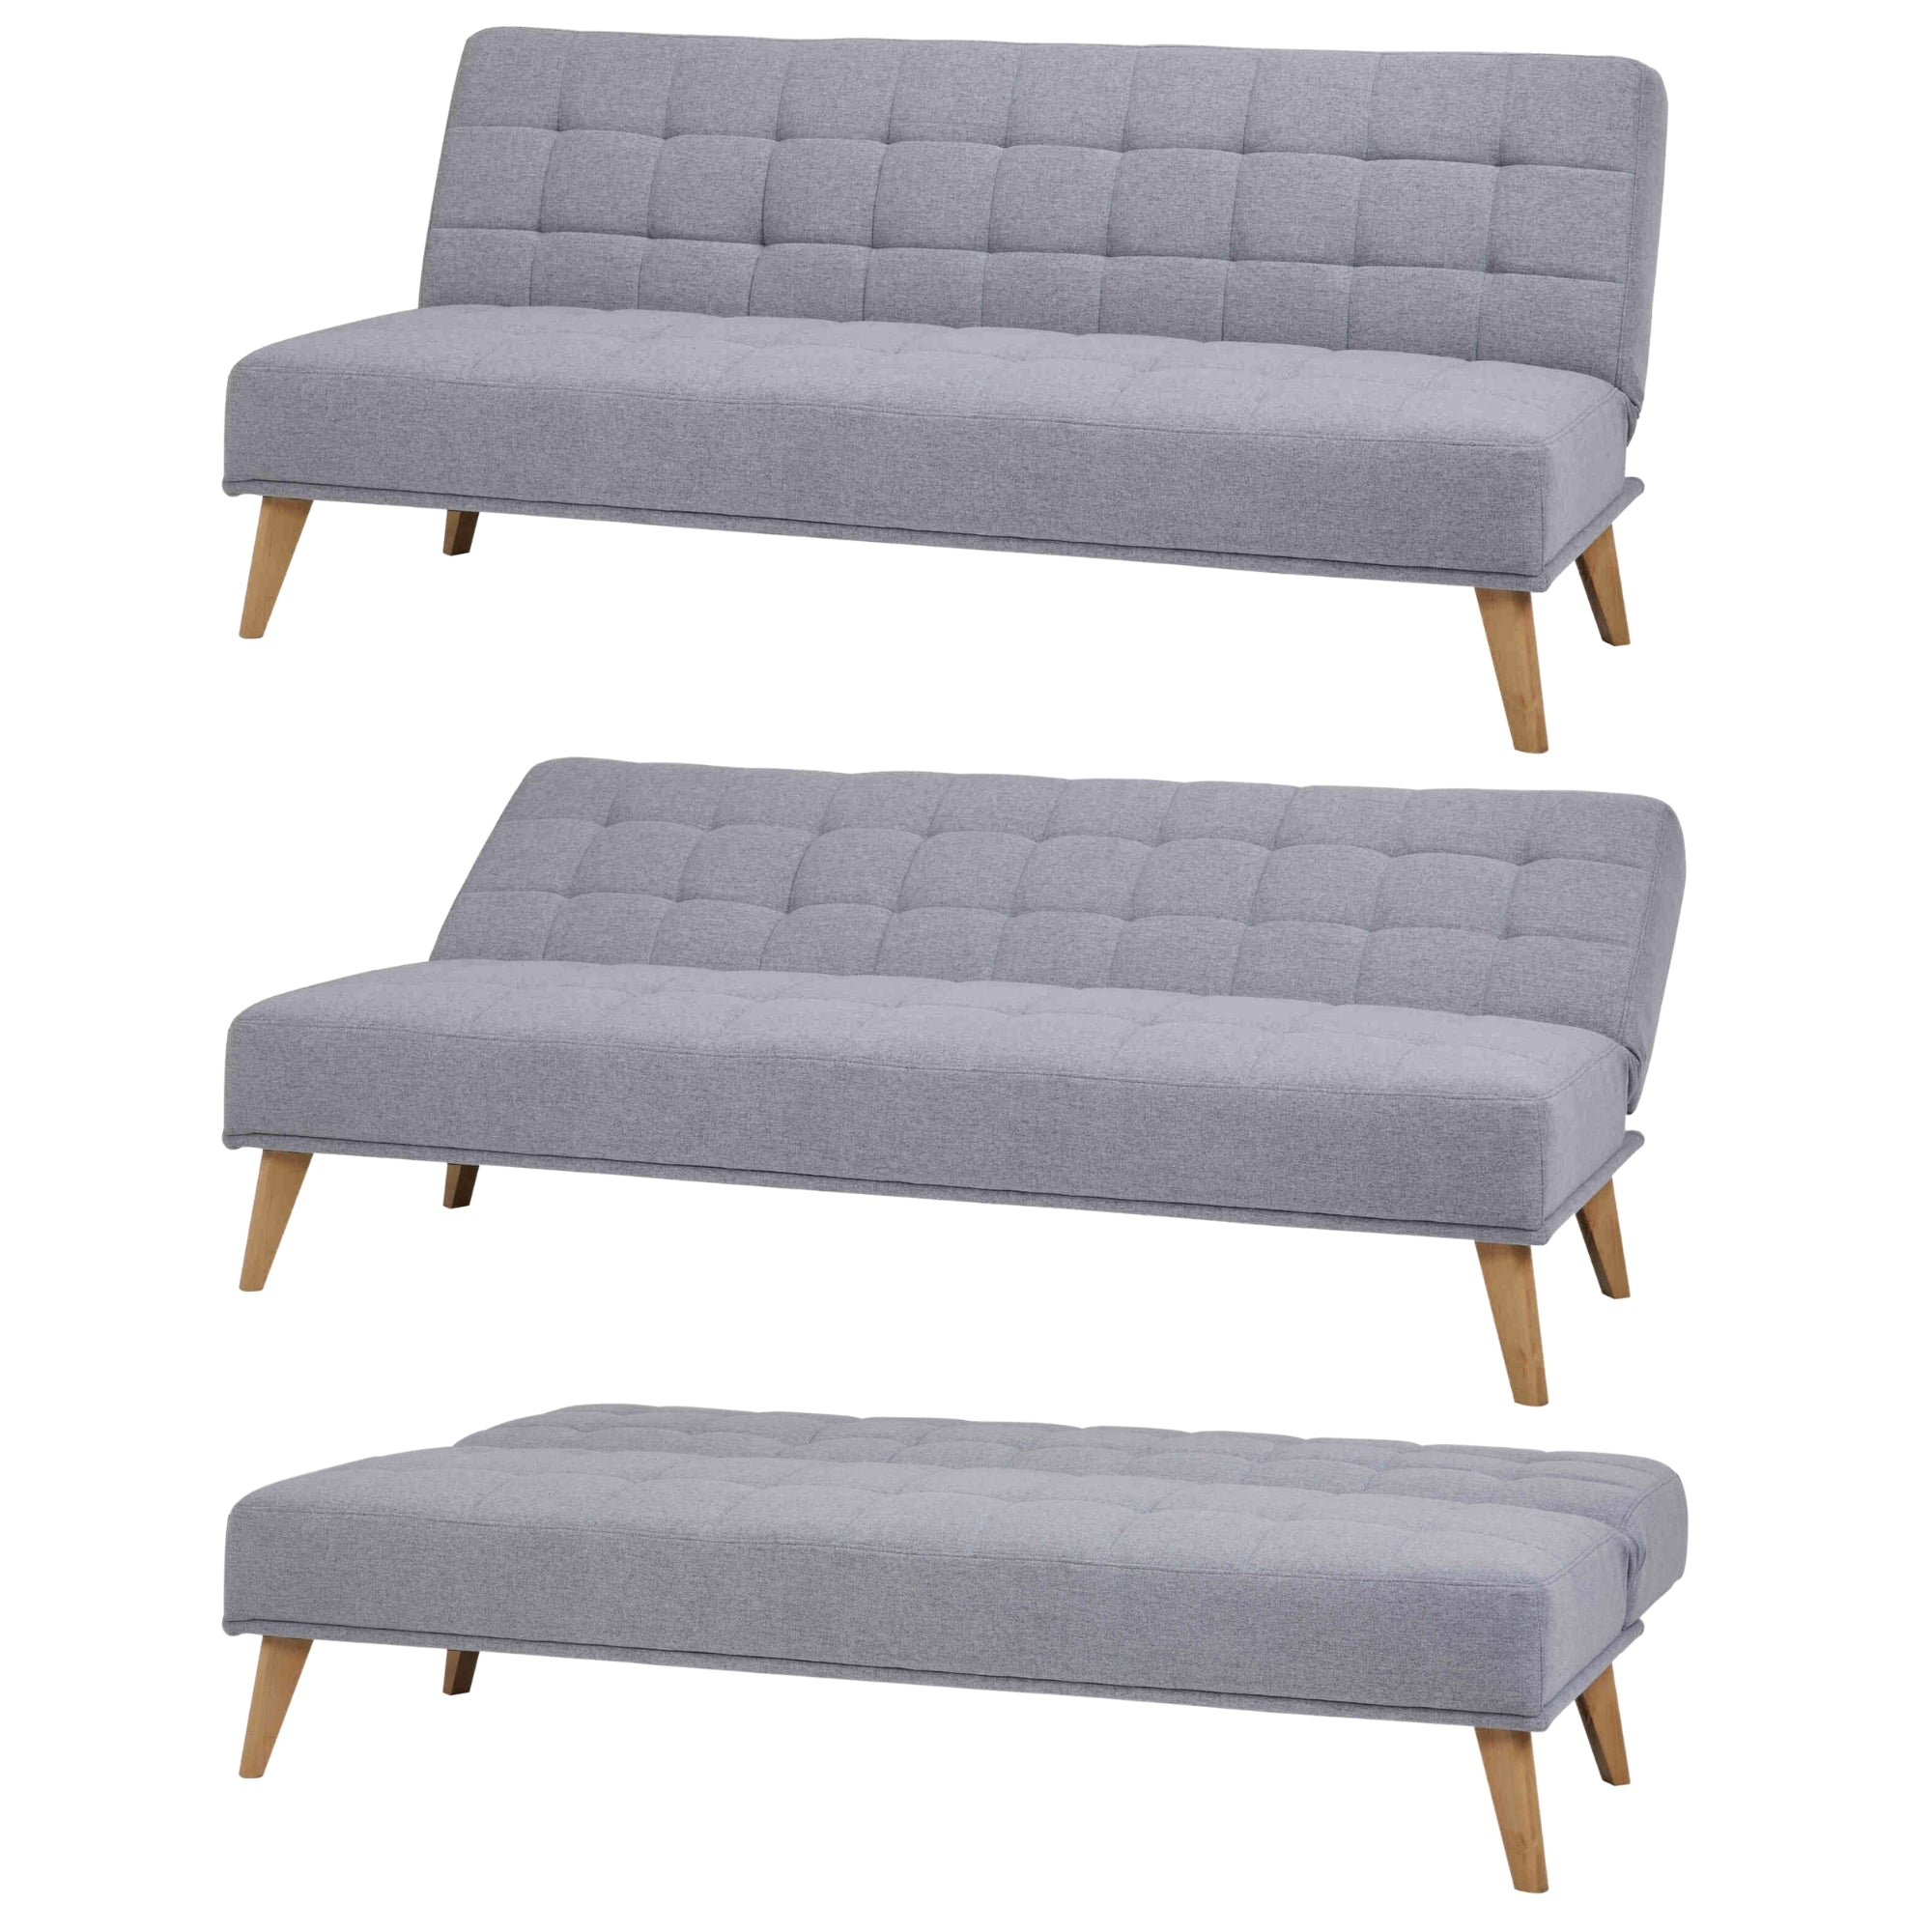 Grey 3 Seater Sofa Bed, Upholstered, Wooden Legs